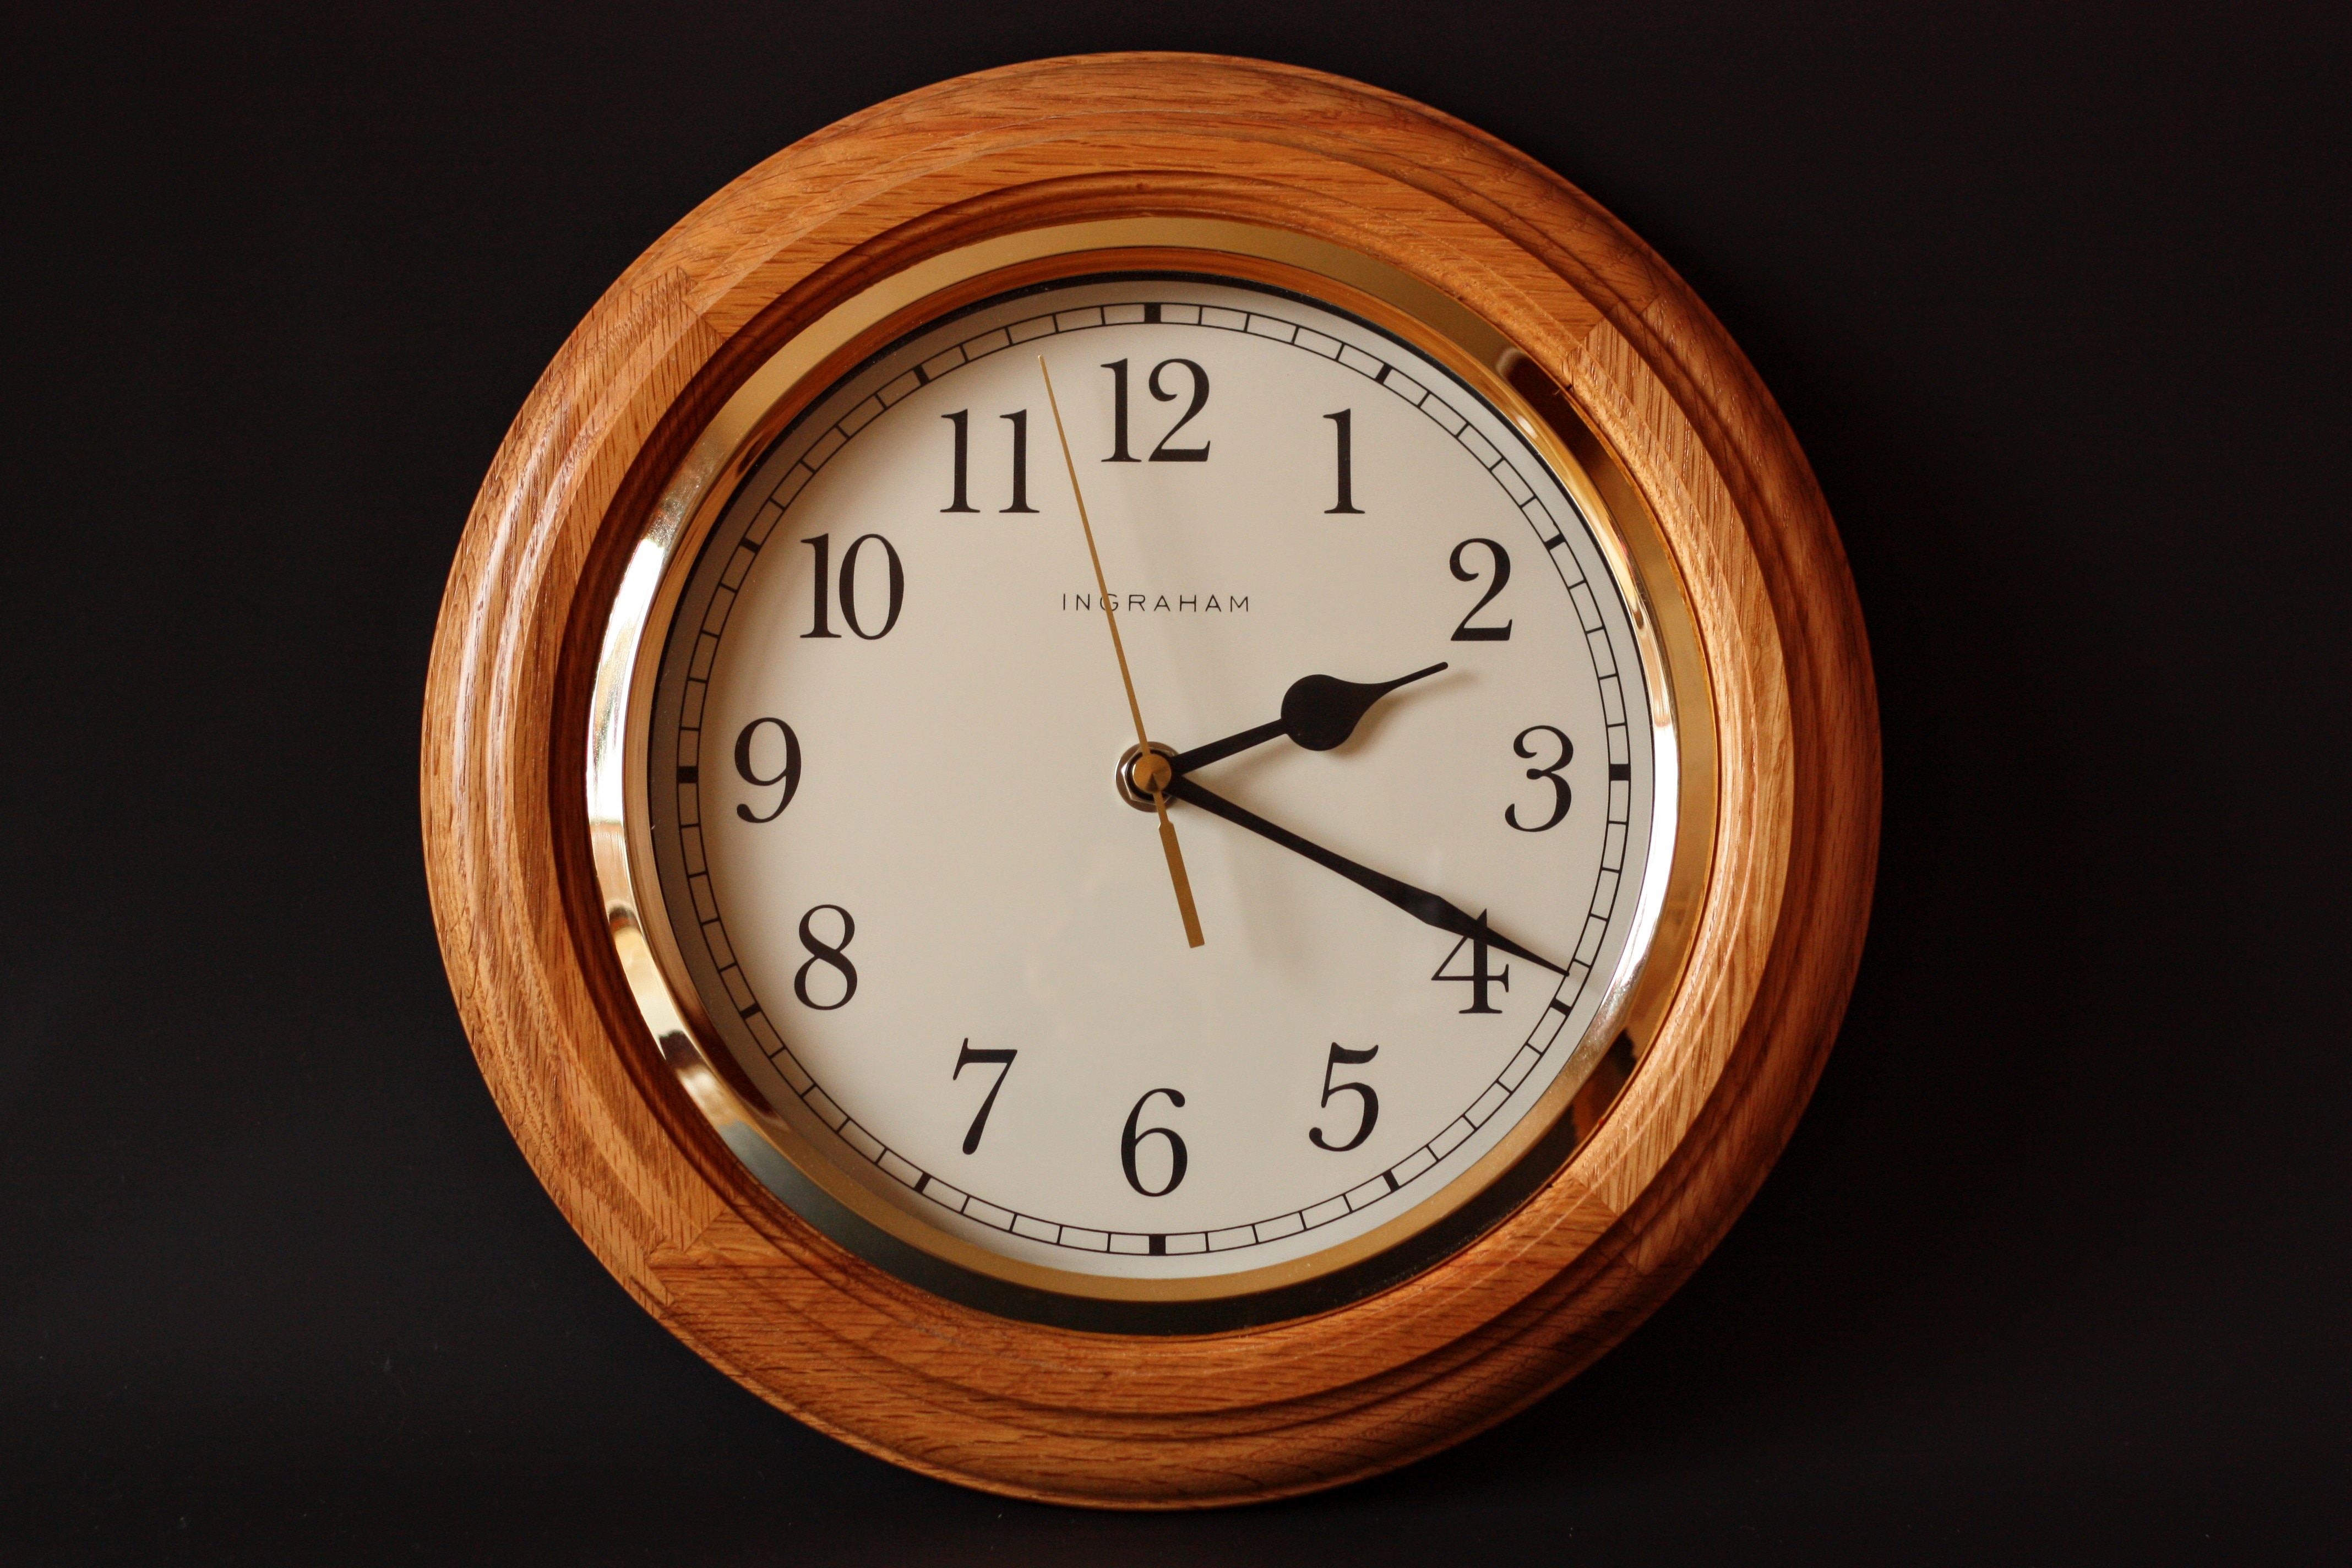 brown and white wooden round wall clock at 2:19